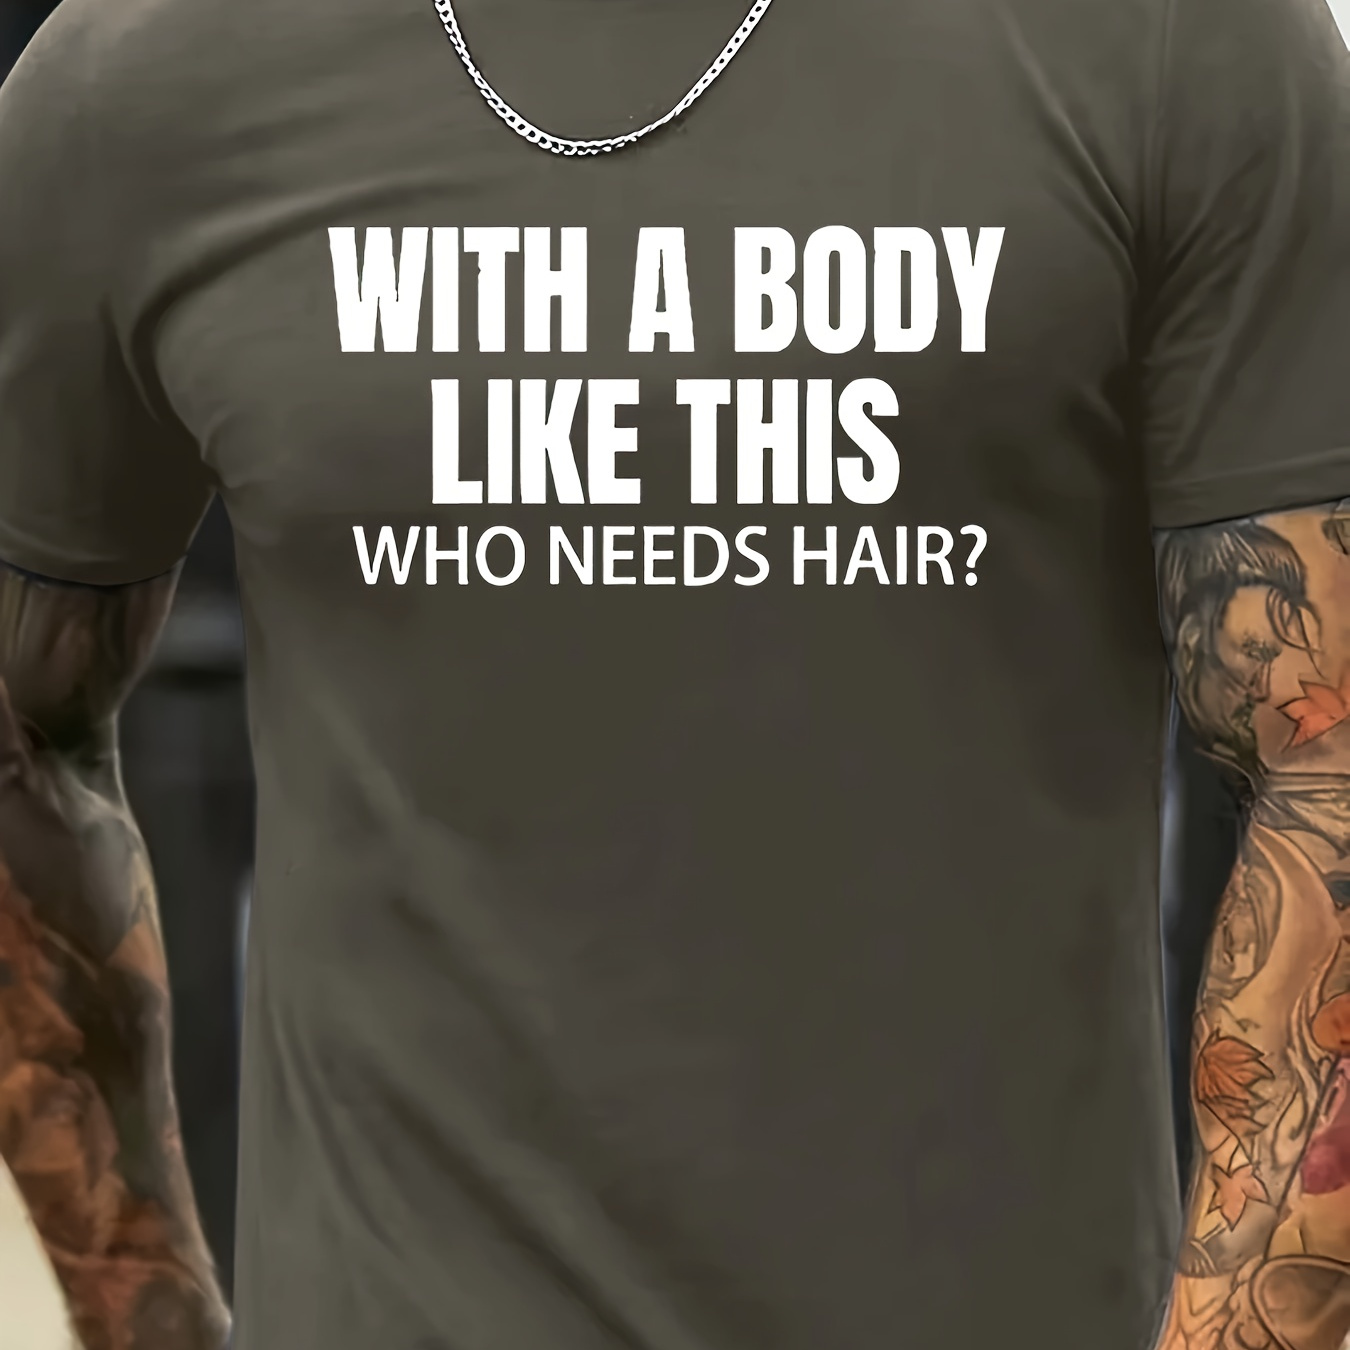 

With A Body Like This Print T Shirt, Tees For Men, Casual Short Sleeve T-shirt For Summer